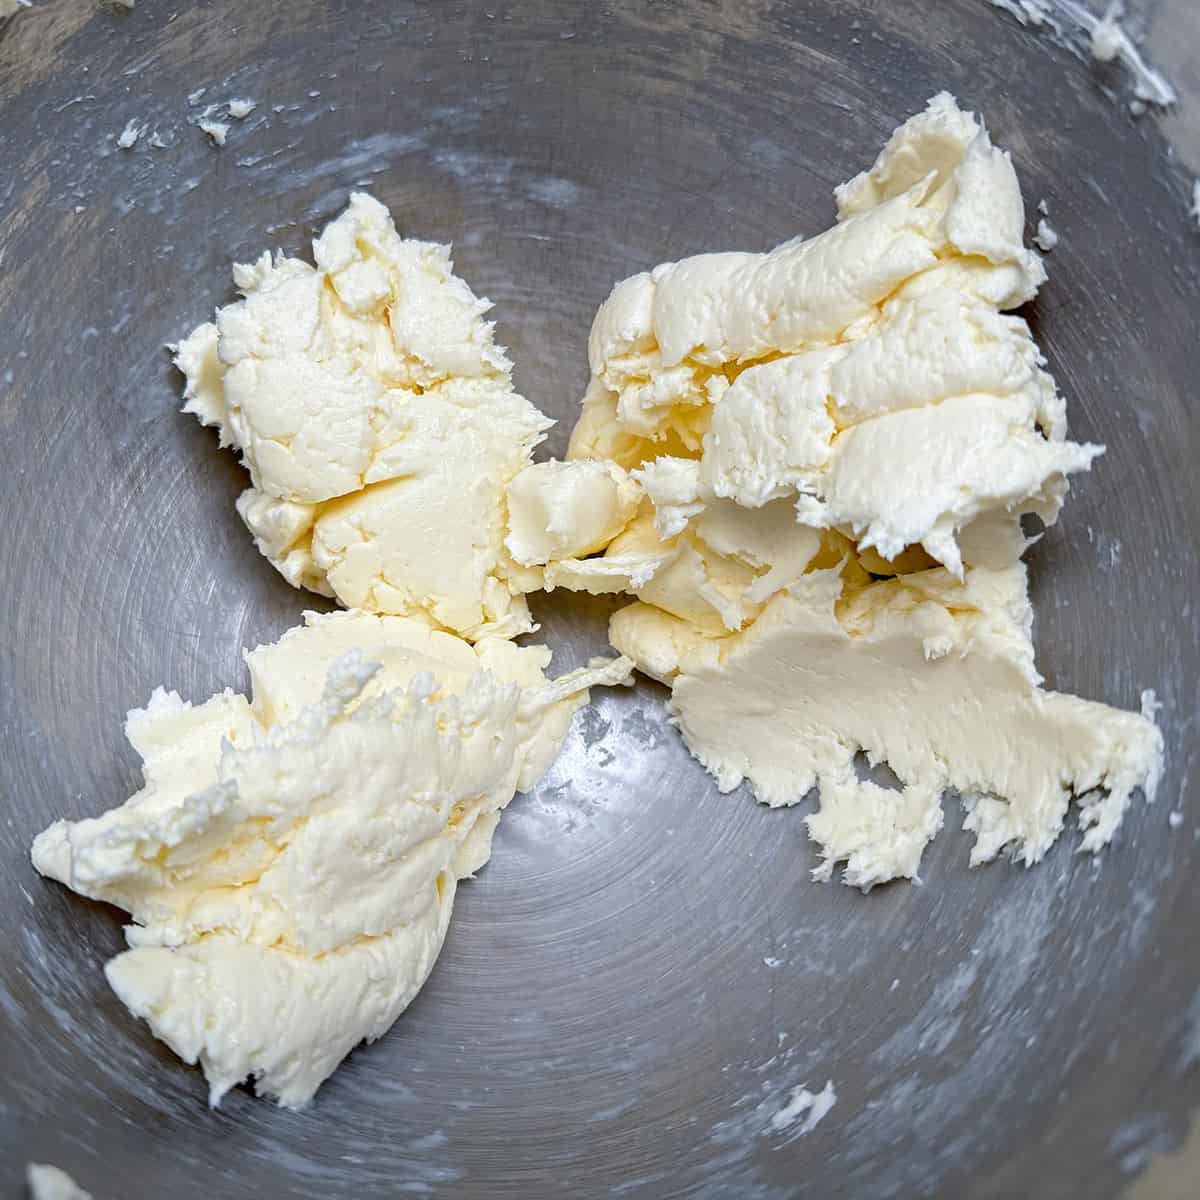 In a mixing bowl butter and cream cheese mixed.